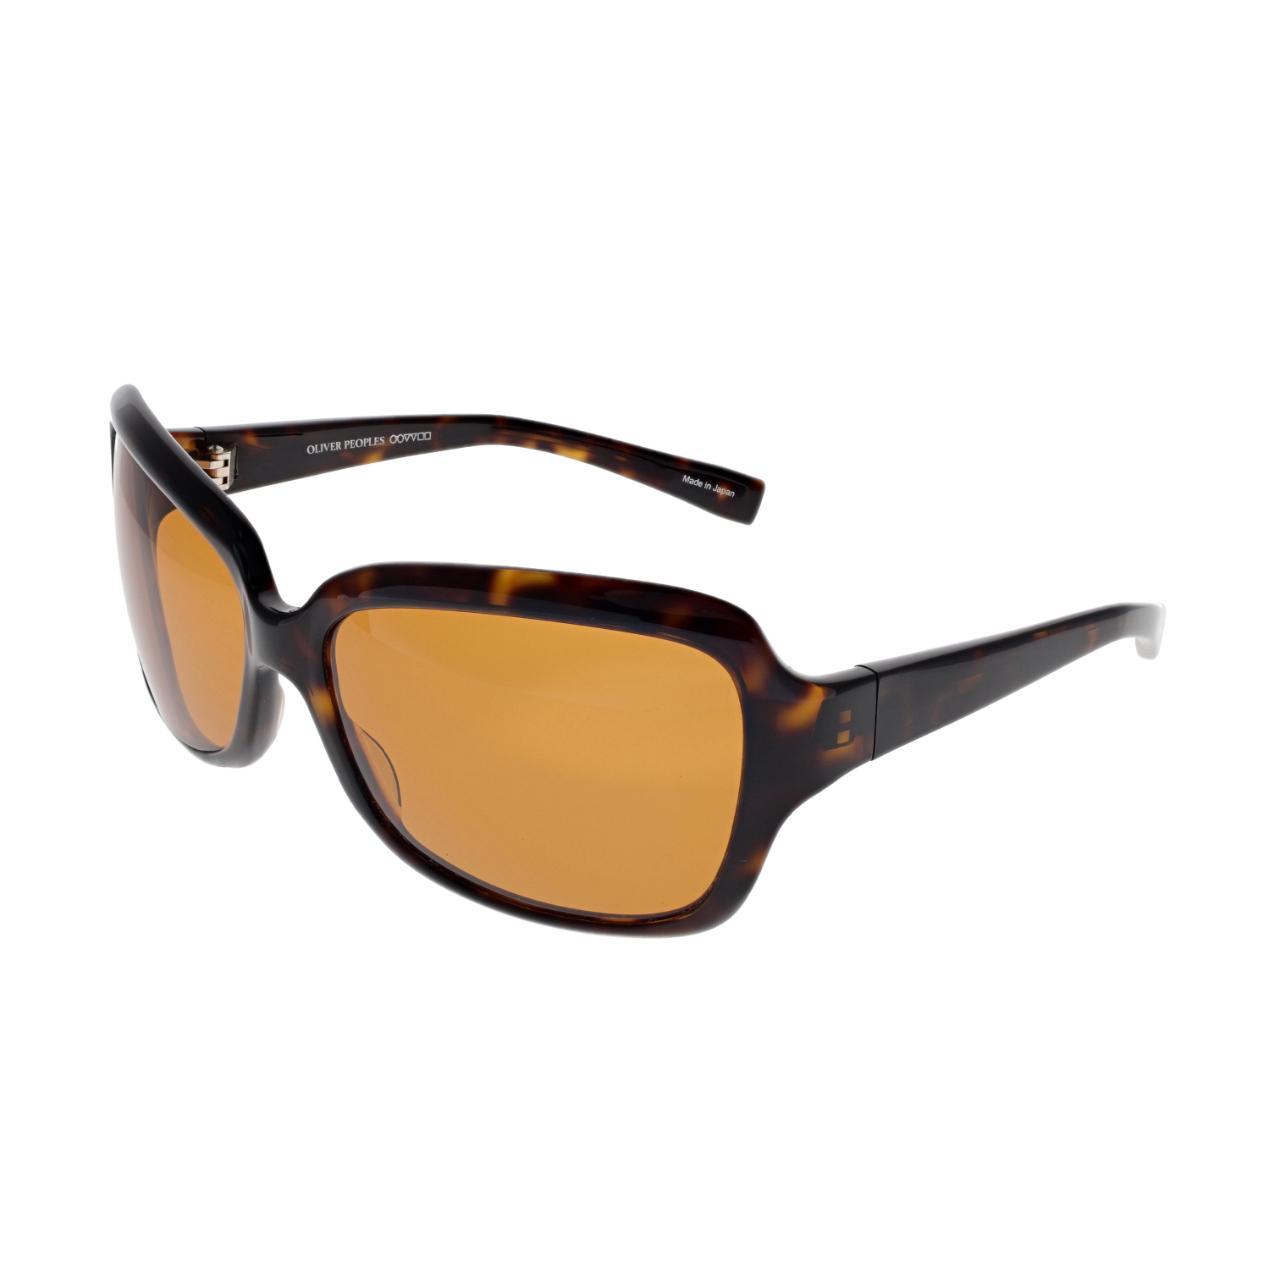 Product Image 1 - OLIVER PEOPLES DUNAWAY SUNGLASSES -